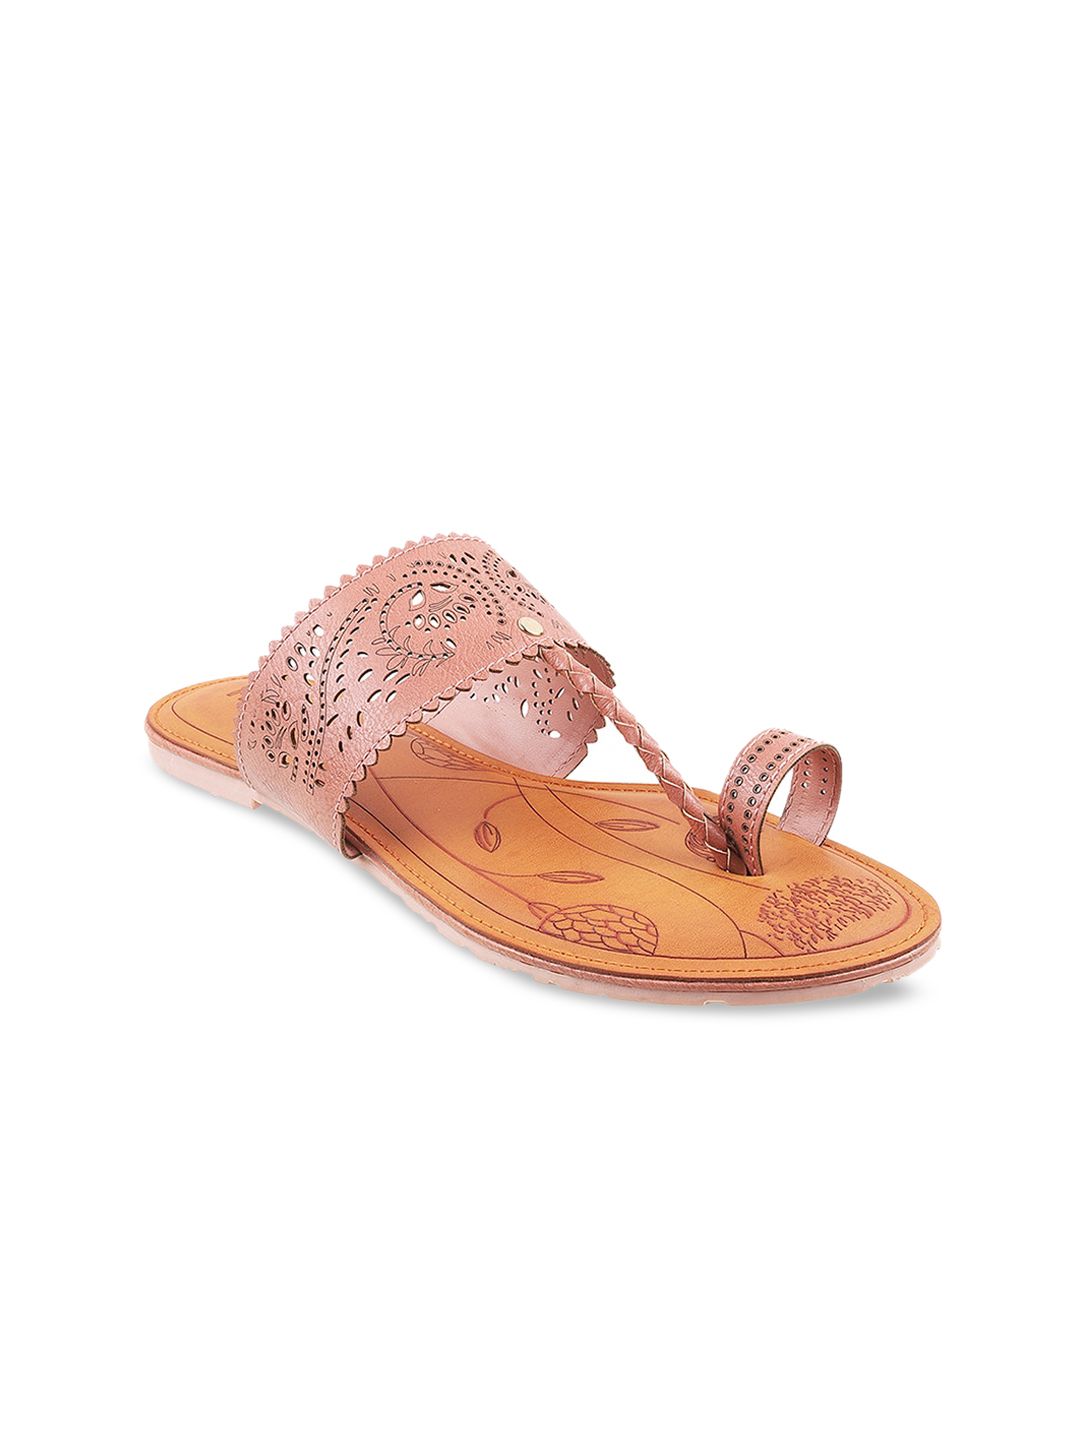 Metro Women Pink T-Strap Flats with Laser Cuts Price in India